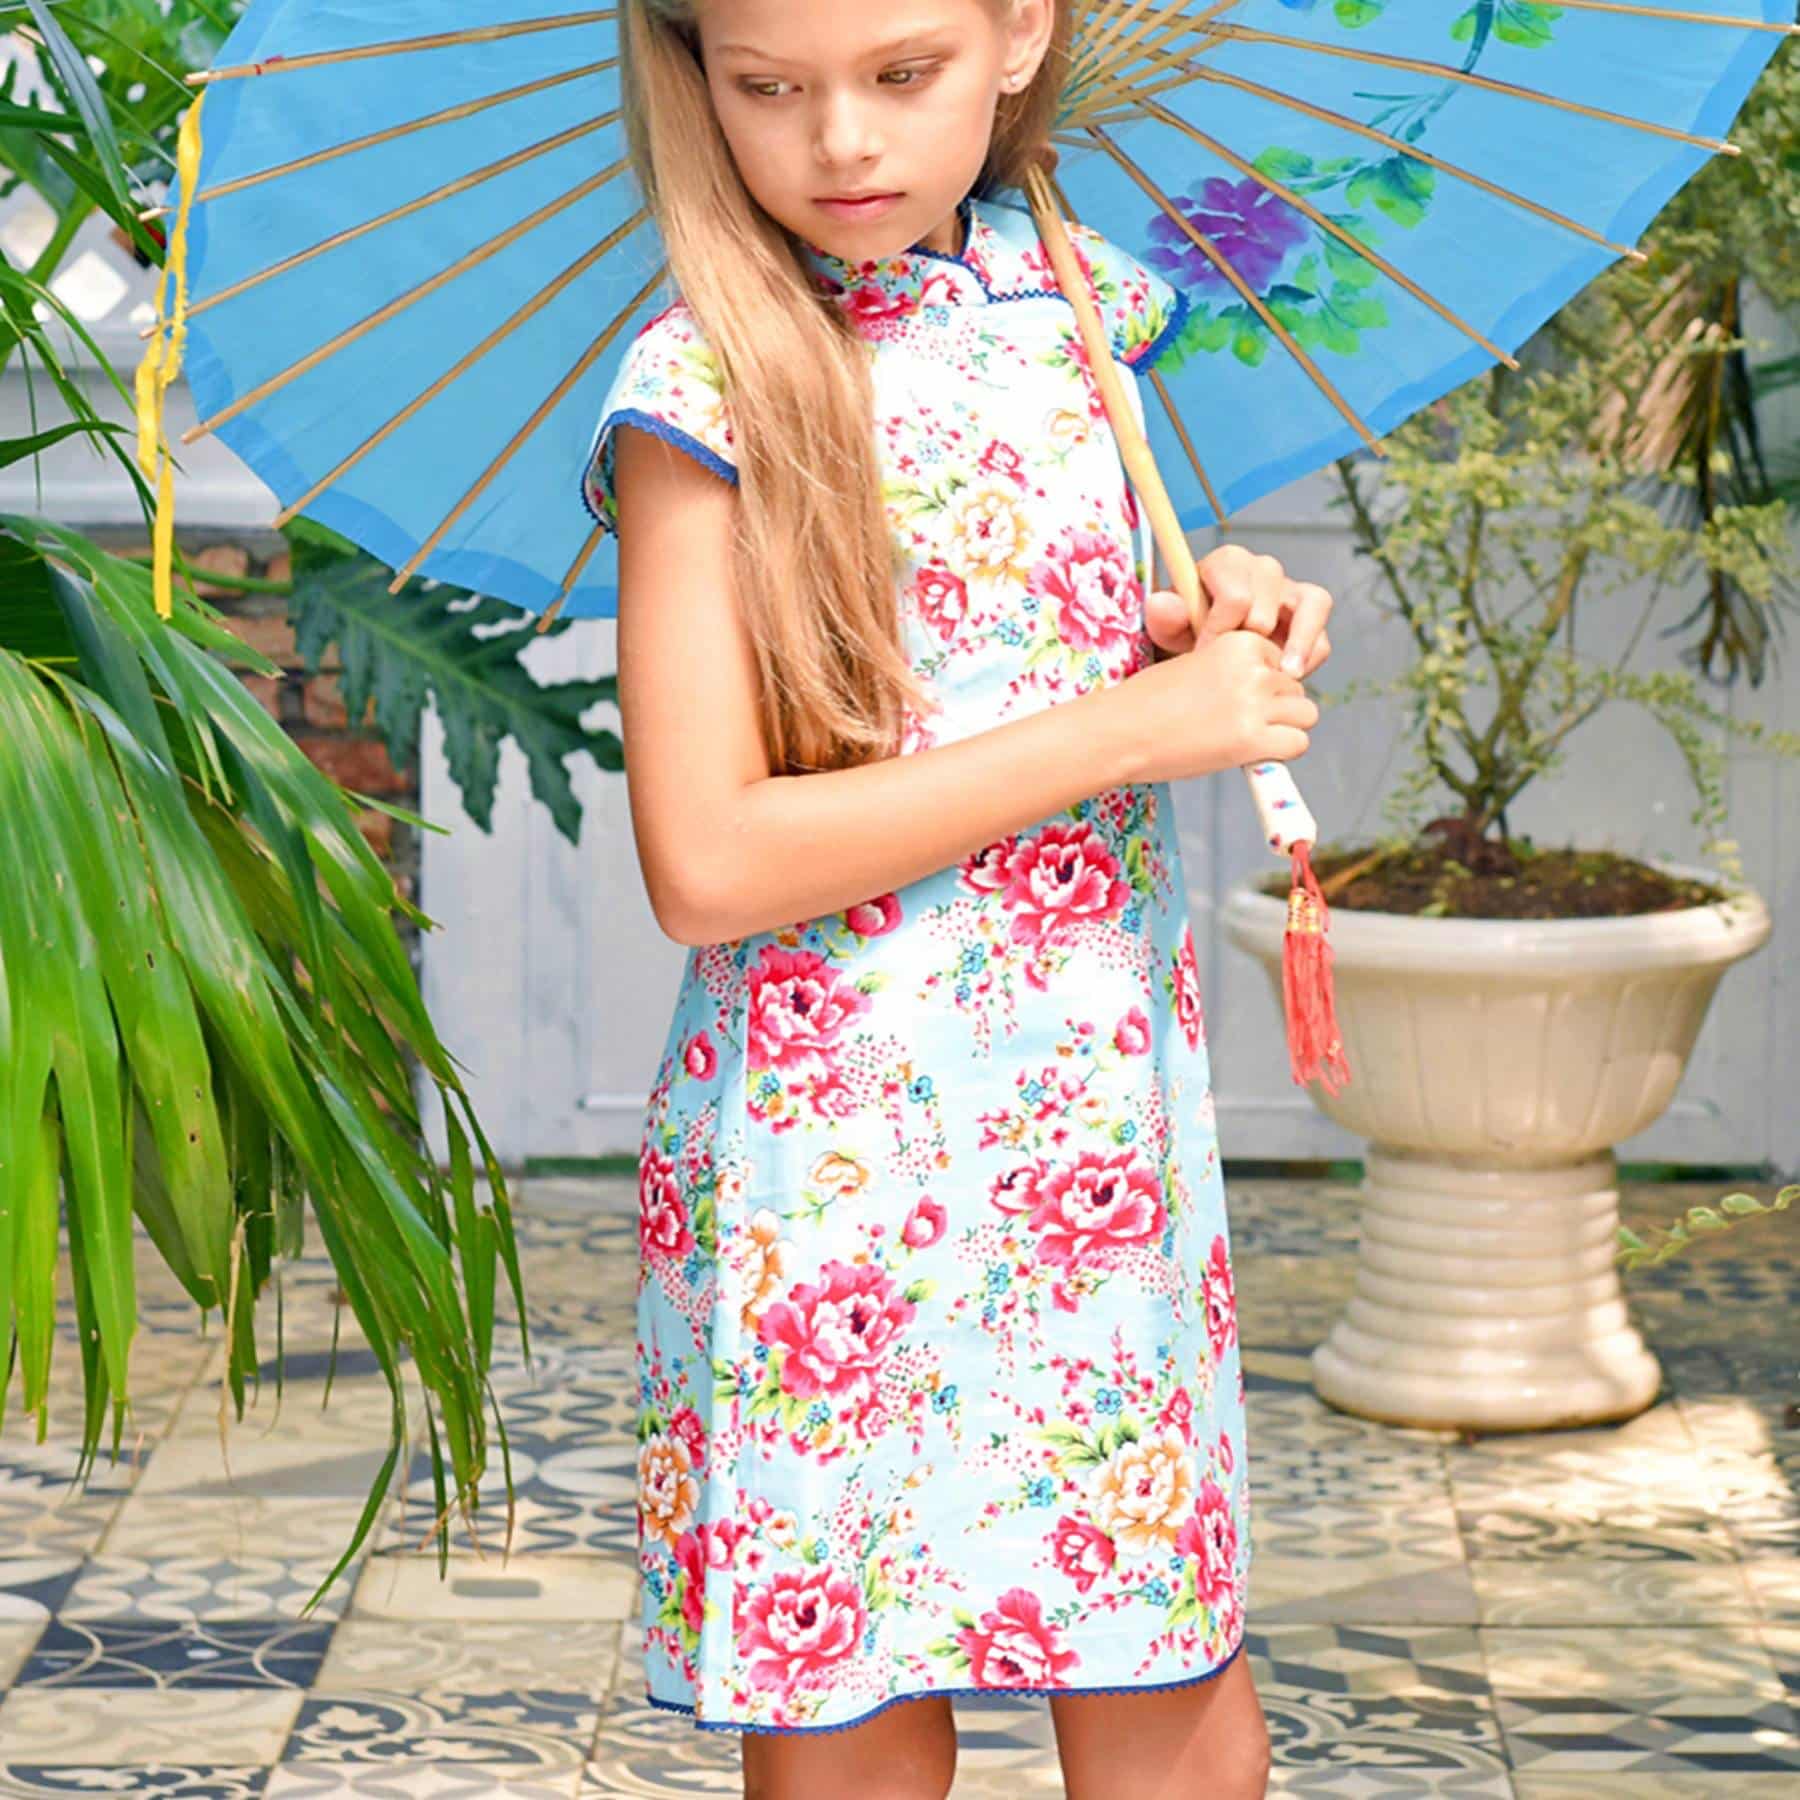 Turquoise blue Chinese dress with fuchsia pink Asian flowers, Mao collar trimmed with fine navy blue lace from the children's fashion brand LA FAUTE A VOLTAIRE